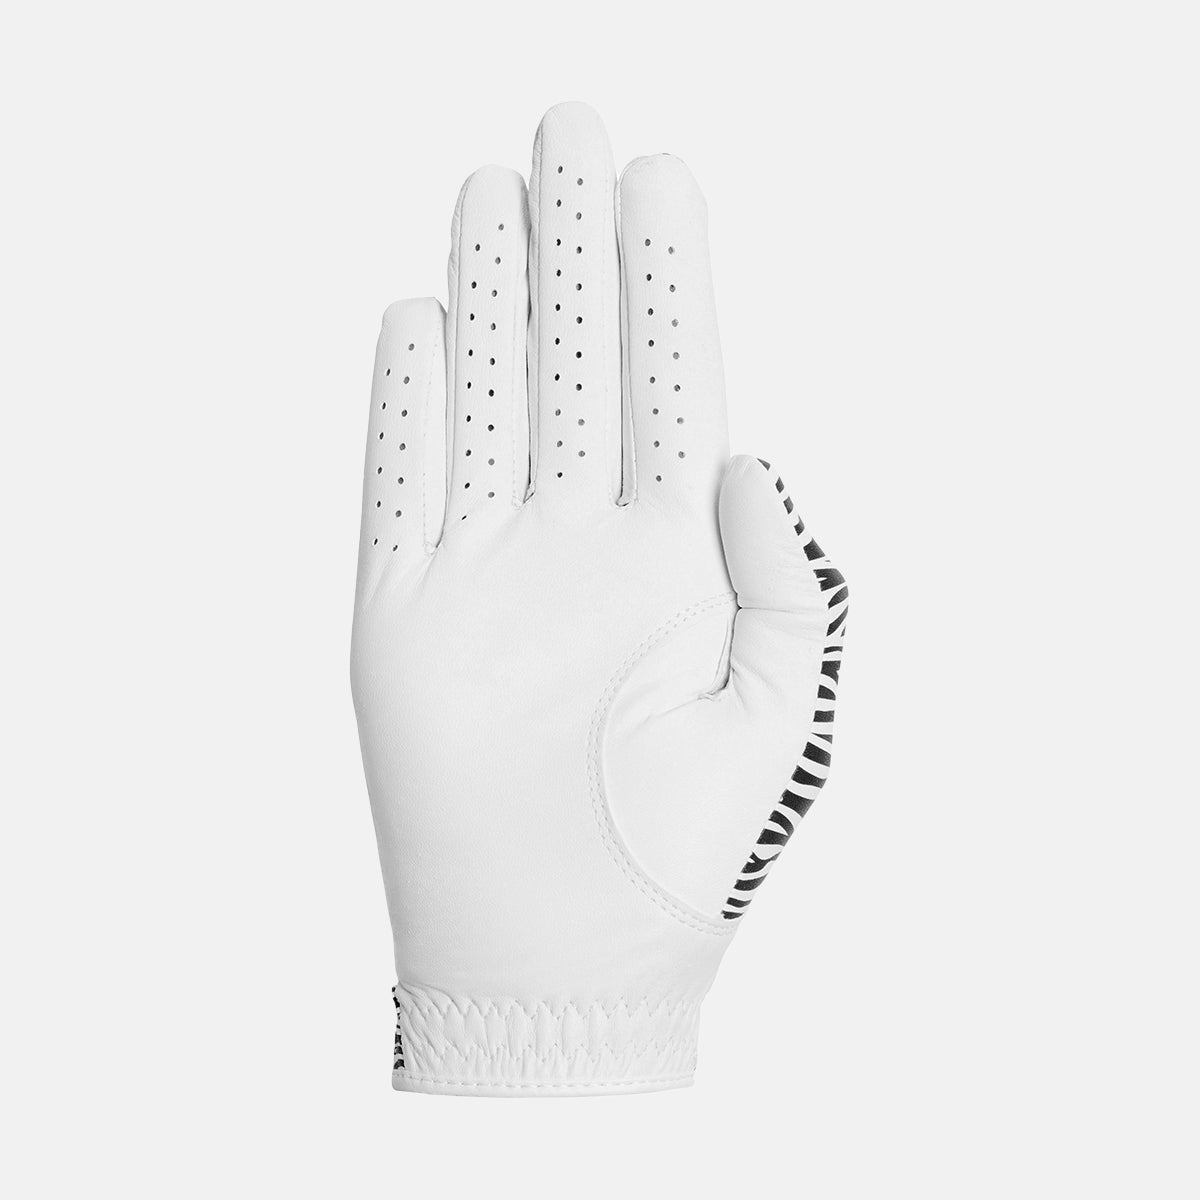 Designer Pro women's golf glove right-handed is made with super-soft Cabretta leather and partnered with stretch microfibre leather 